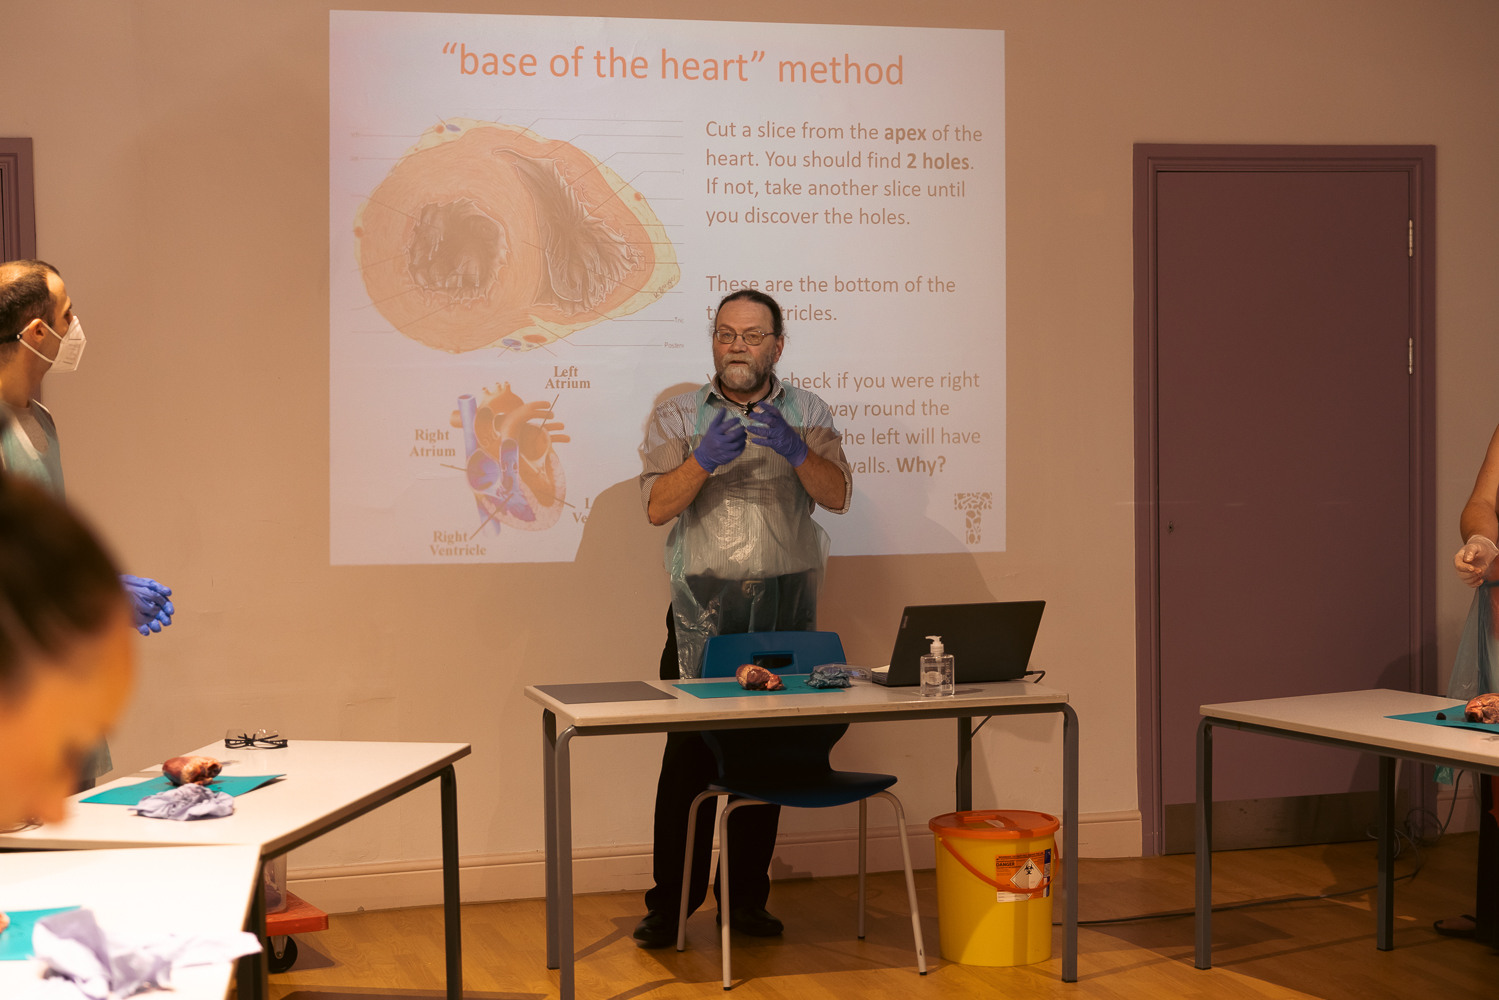 Image shows a cClass learning about hearts